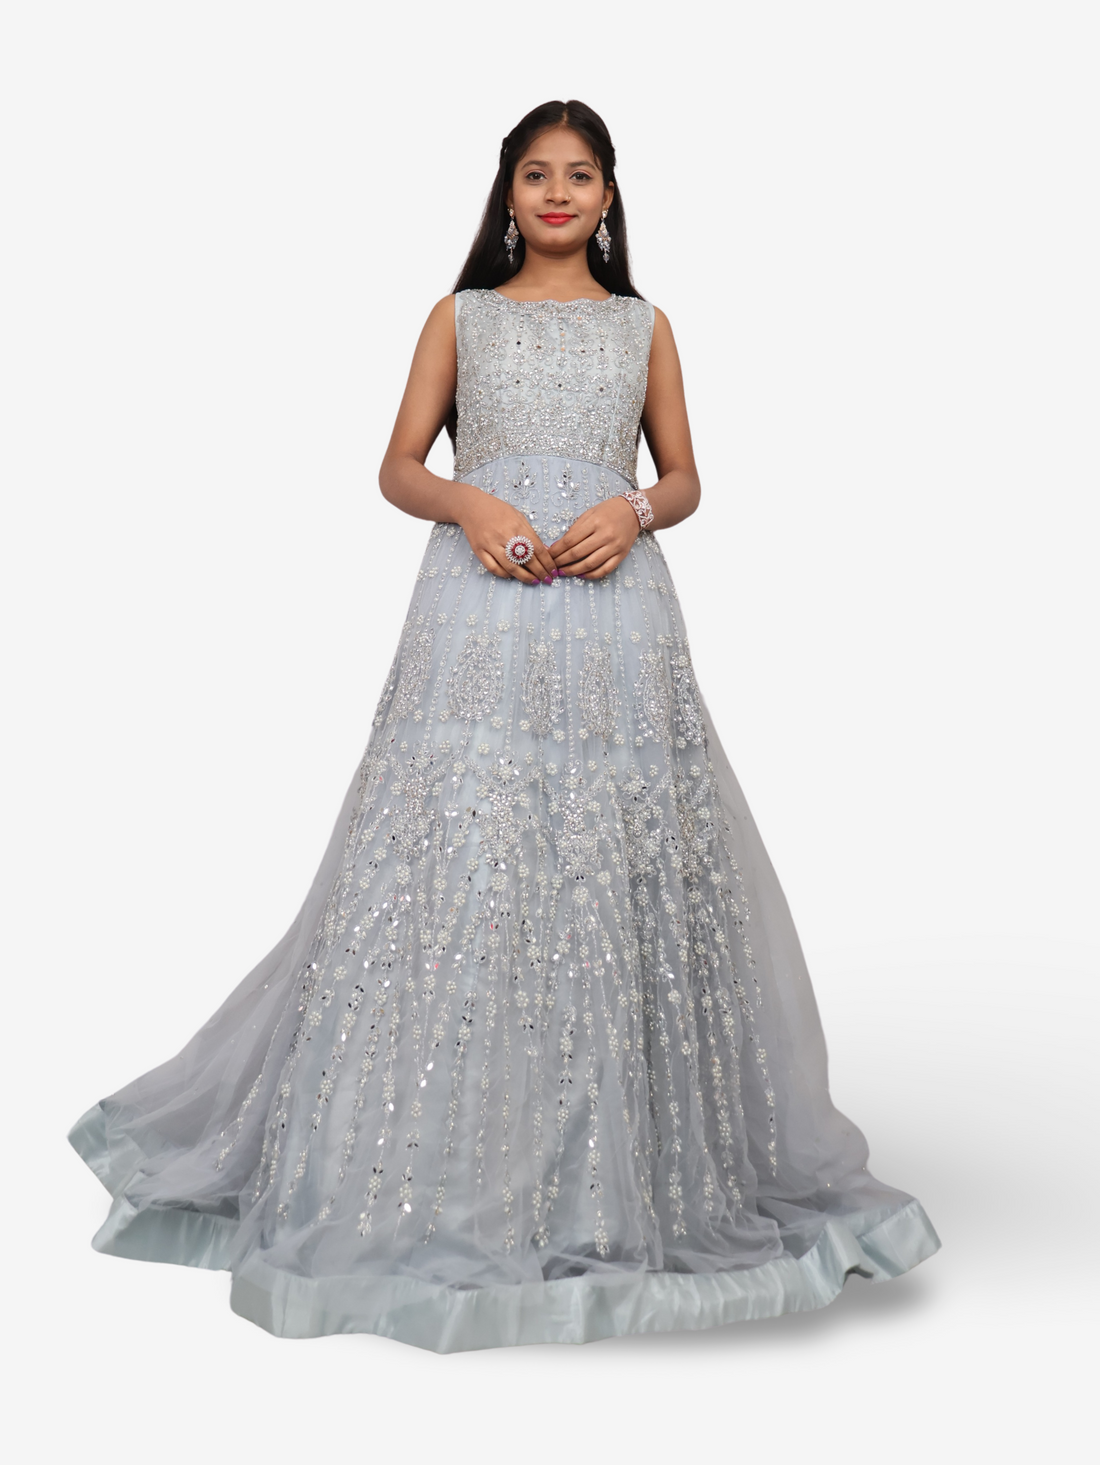 Net Fabric Gown with Pearl &amp; Embroidery by Shreekama Grey Designer Gowns for Party Festival Wedding Occasion in Noida